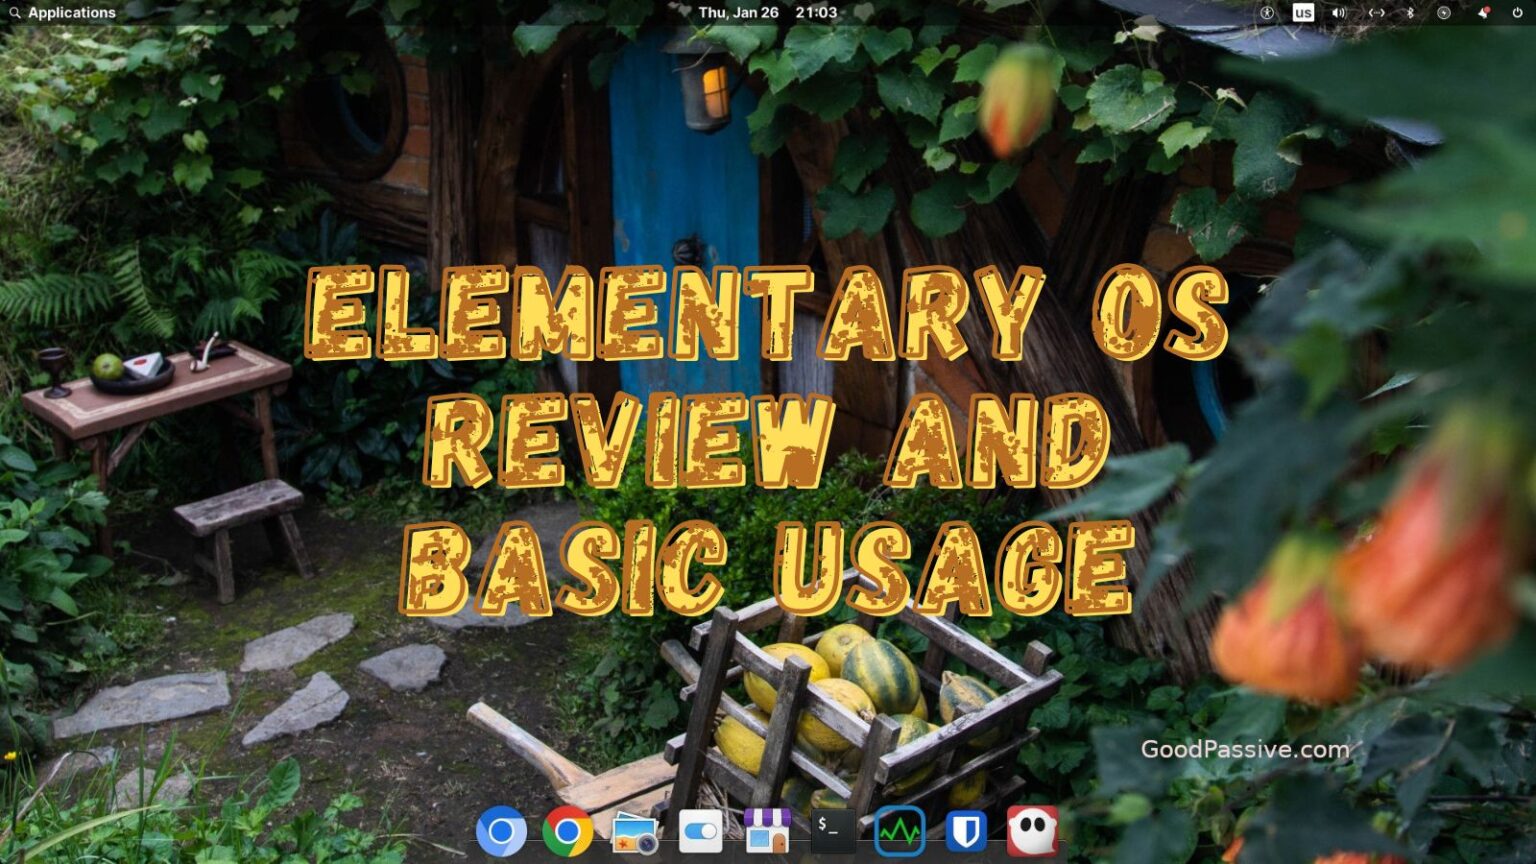 Elementary OS Review And Basic Usage